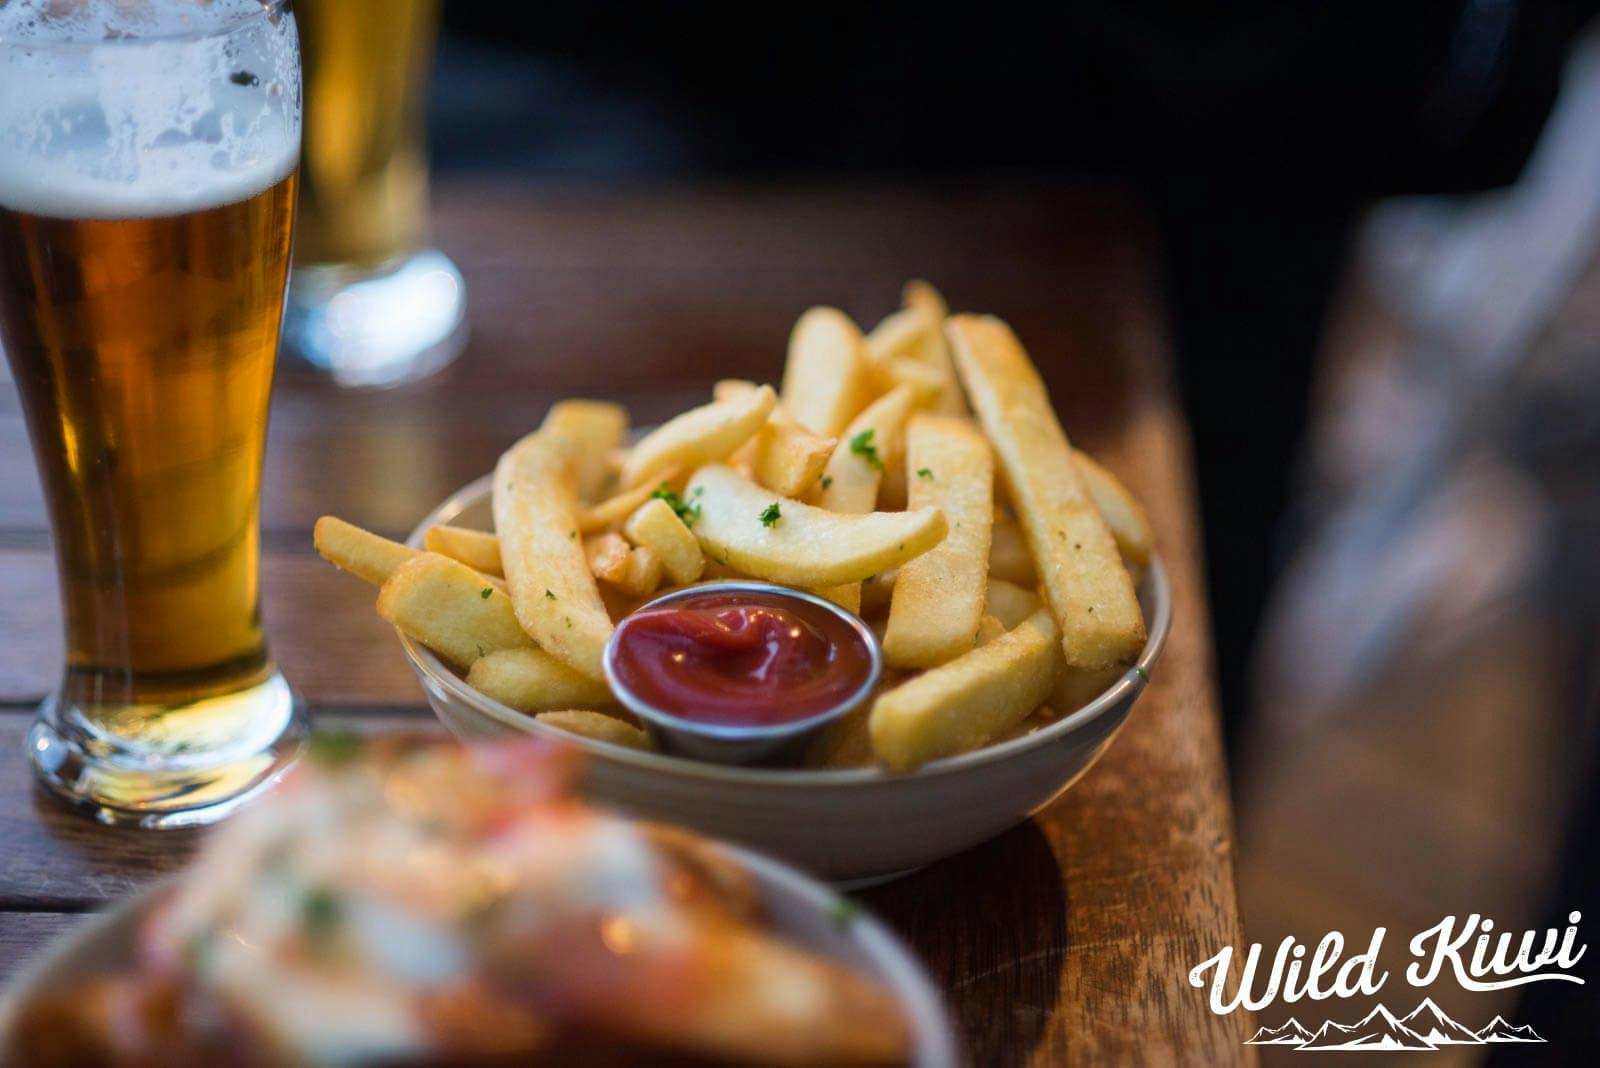 Dine out in Queenstown - Try wholesome dishes